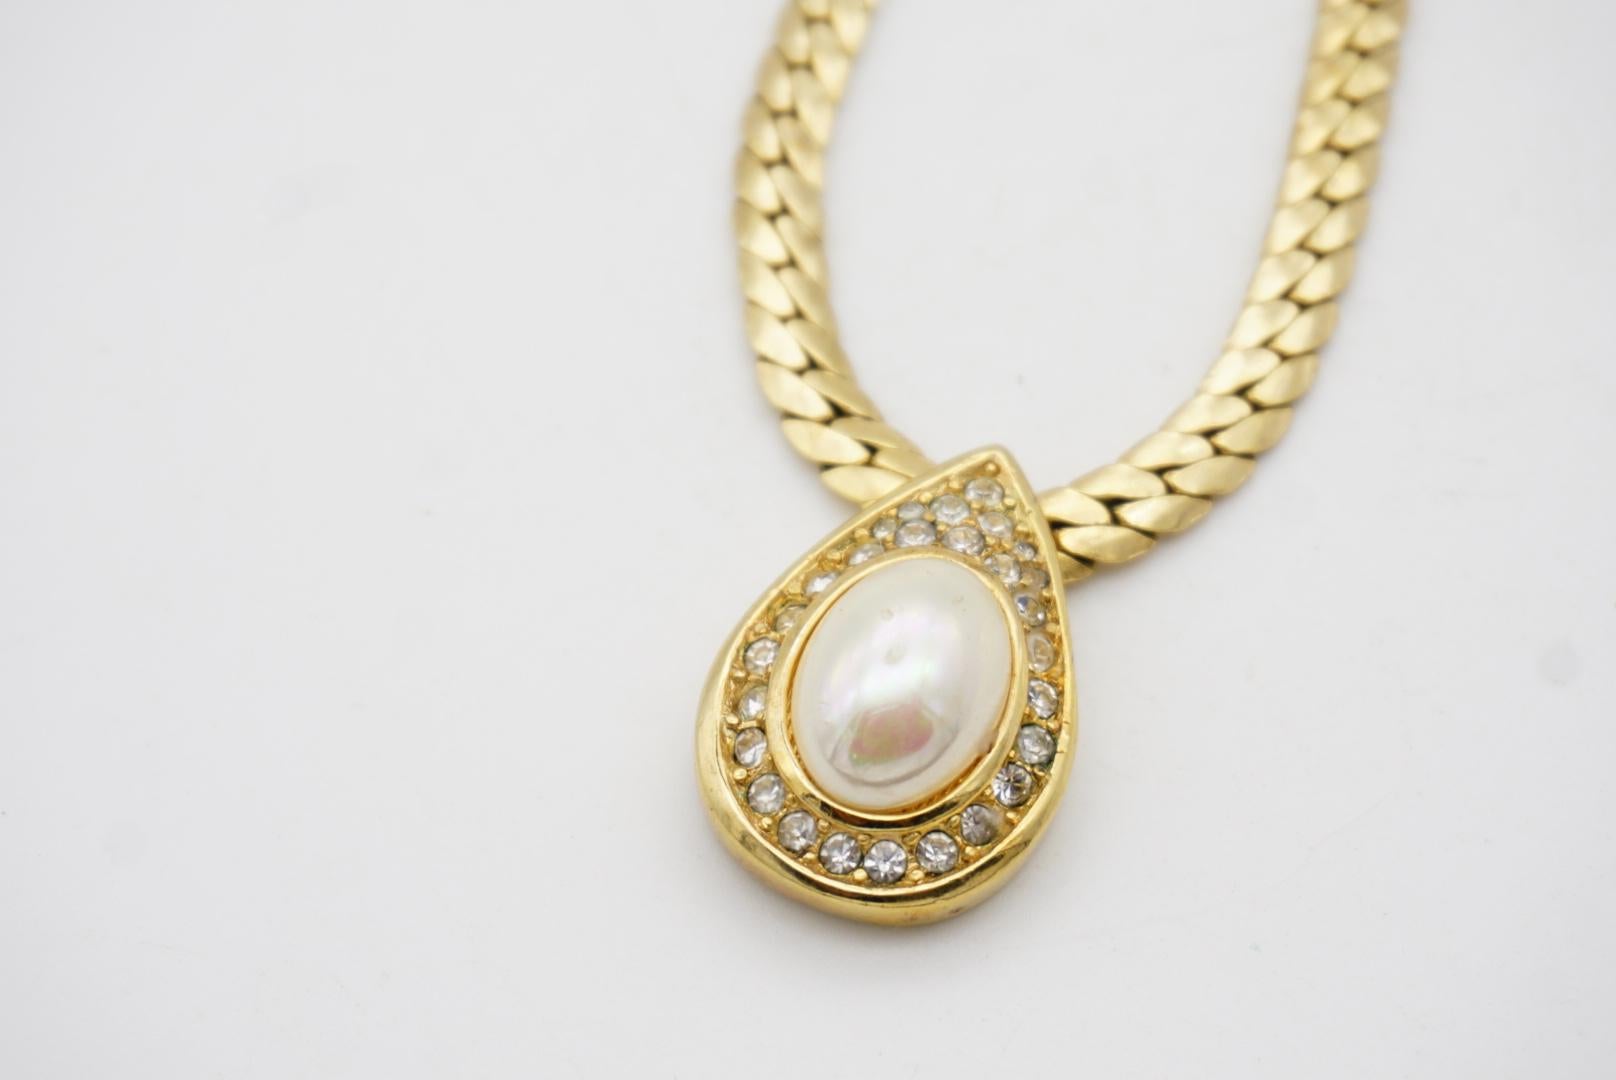 Christian Dior Vintage 1980s White Pearl Crystals Water Drop Pendant Necklace For Sale 2